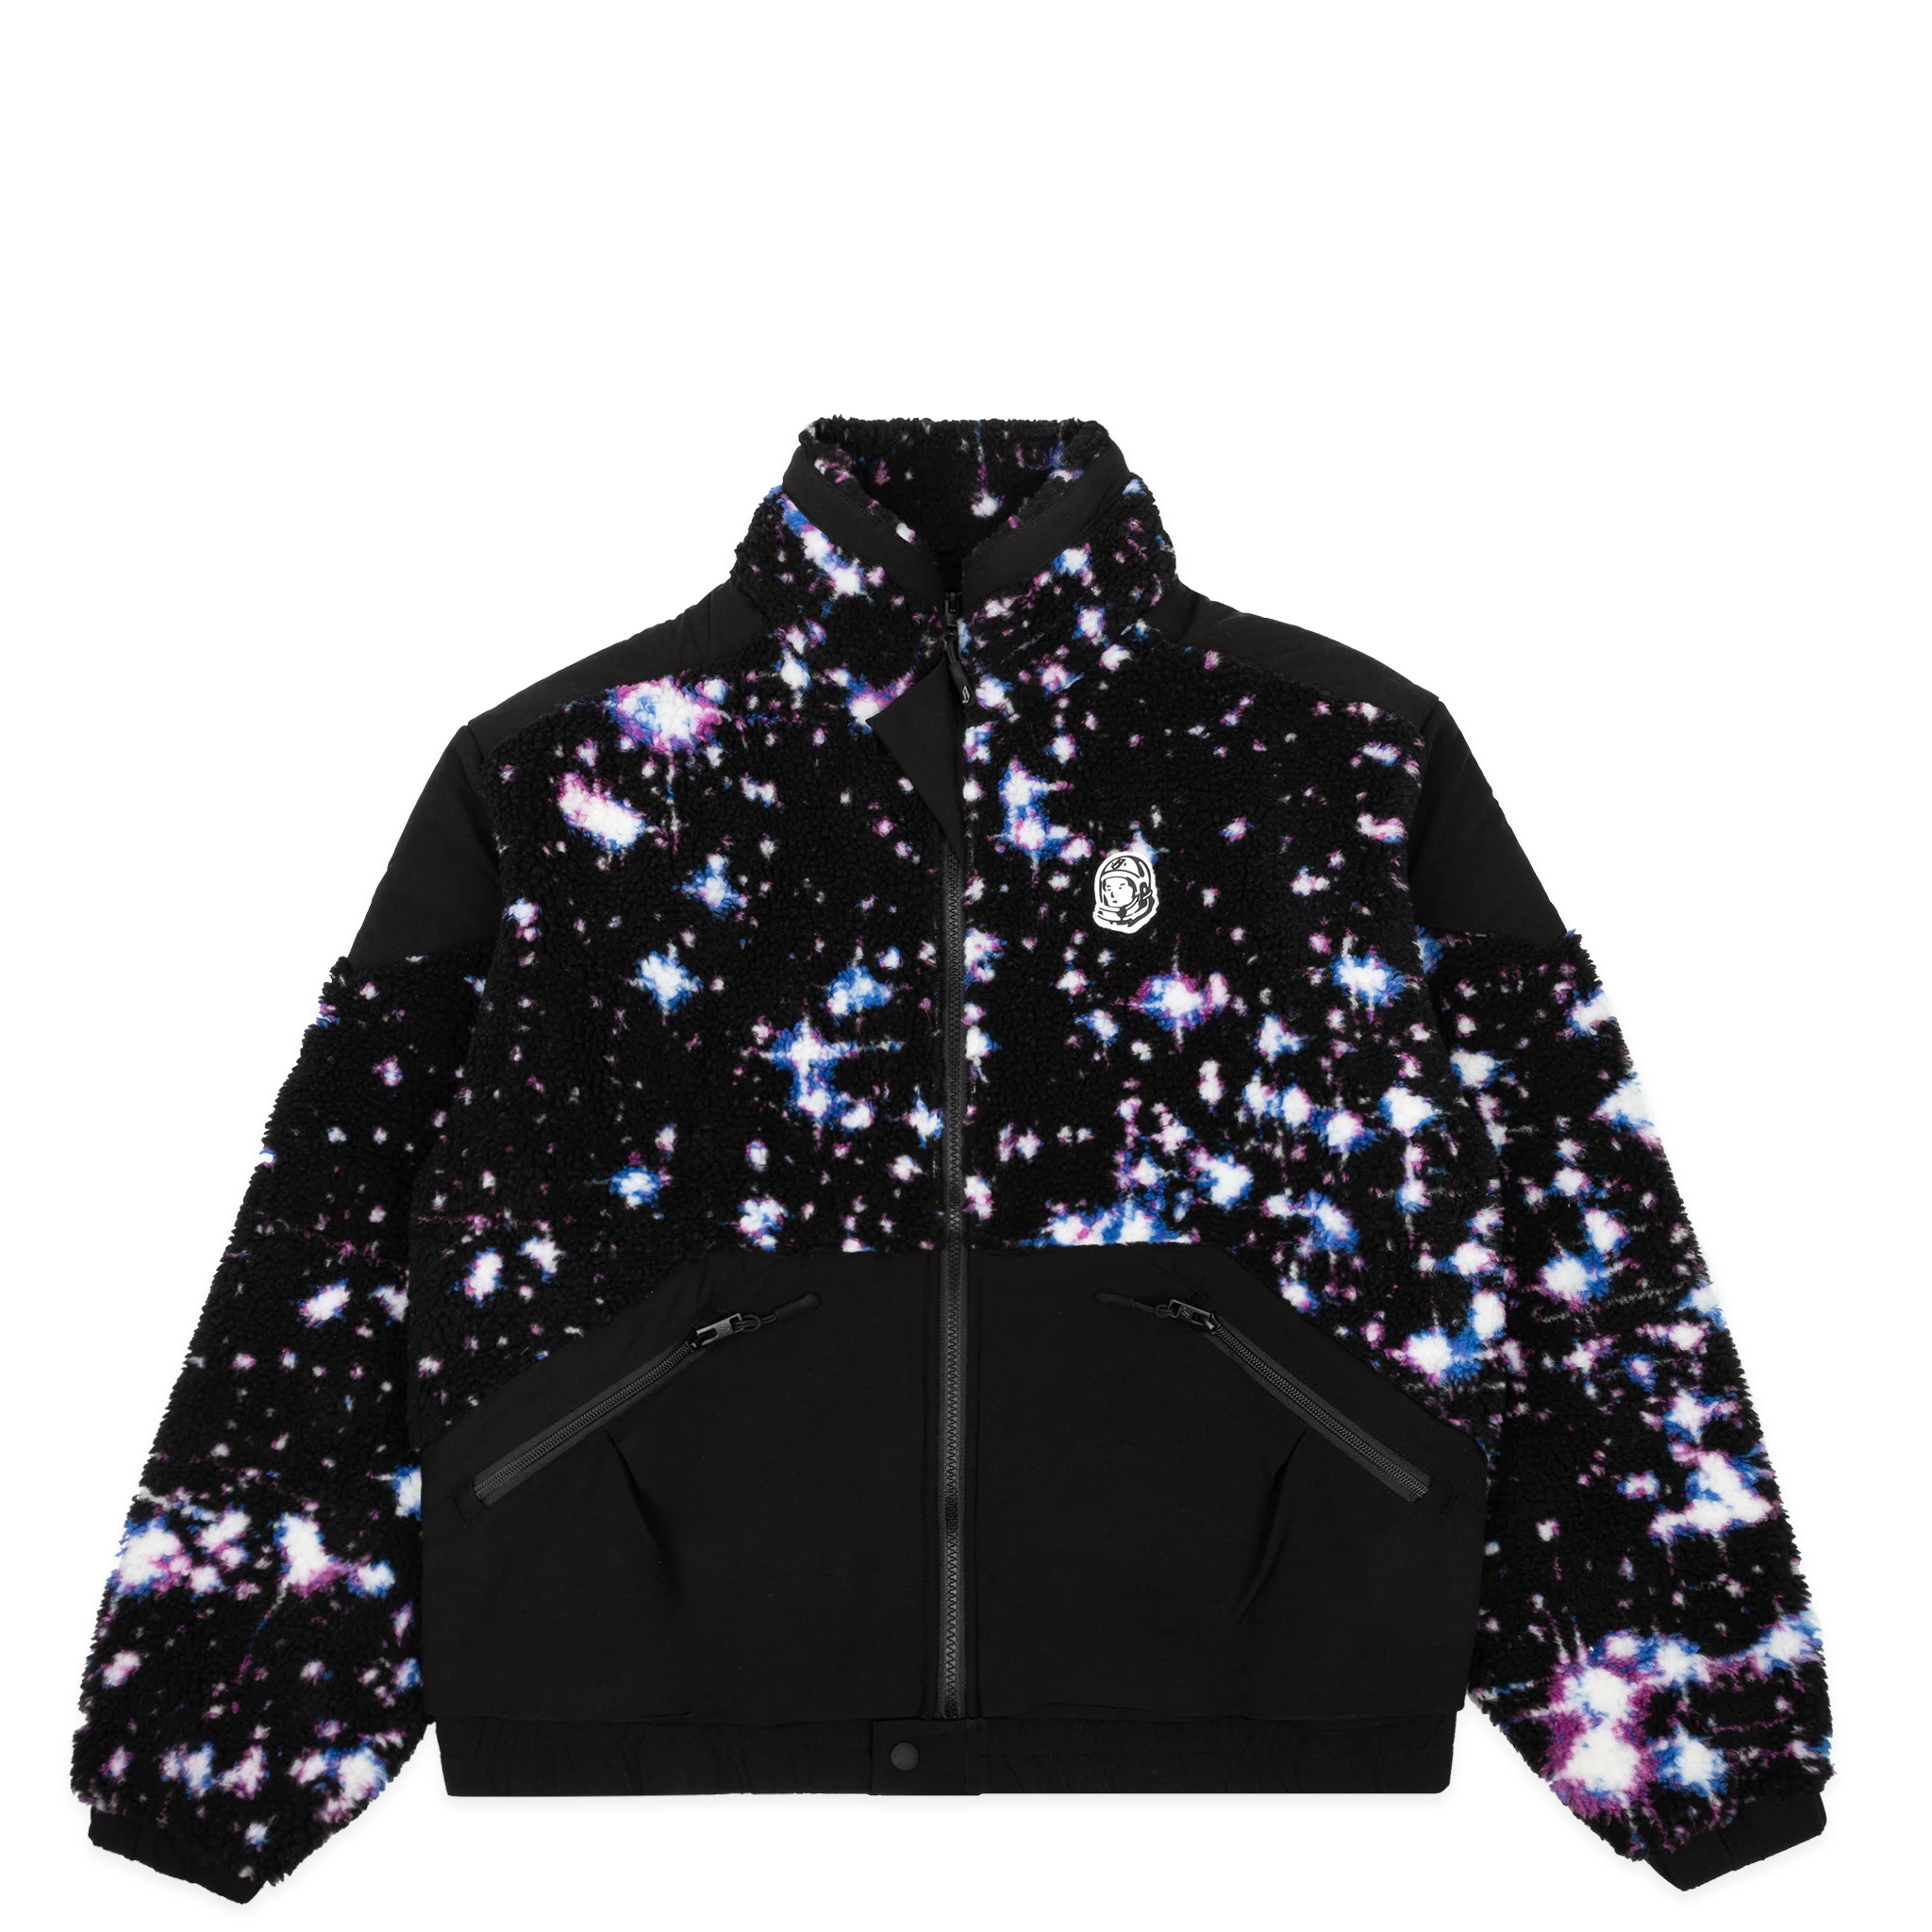 BBCICECREAM S Leather Sleeve Galaxy Varsity Jacket in Brown for